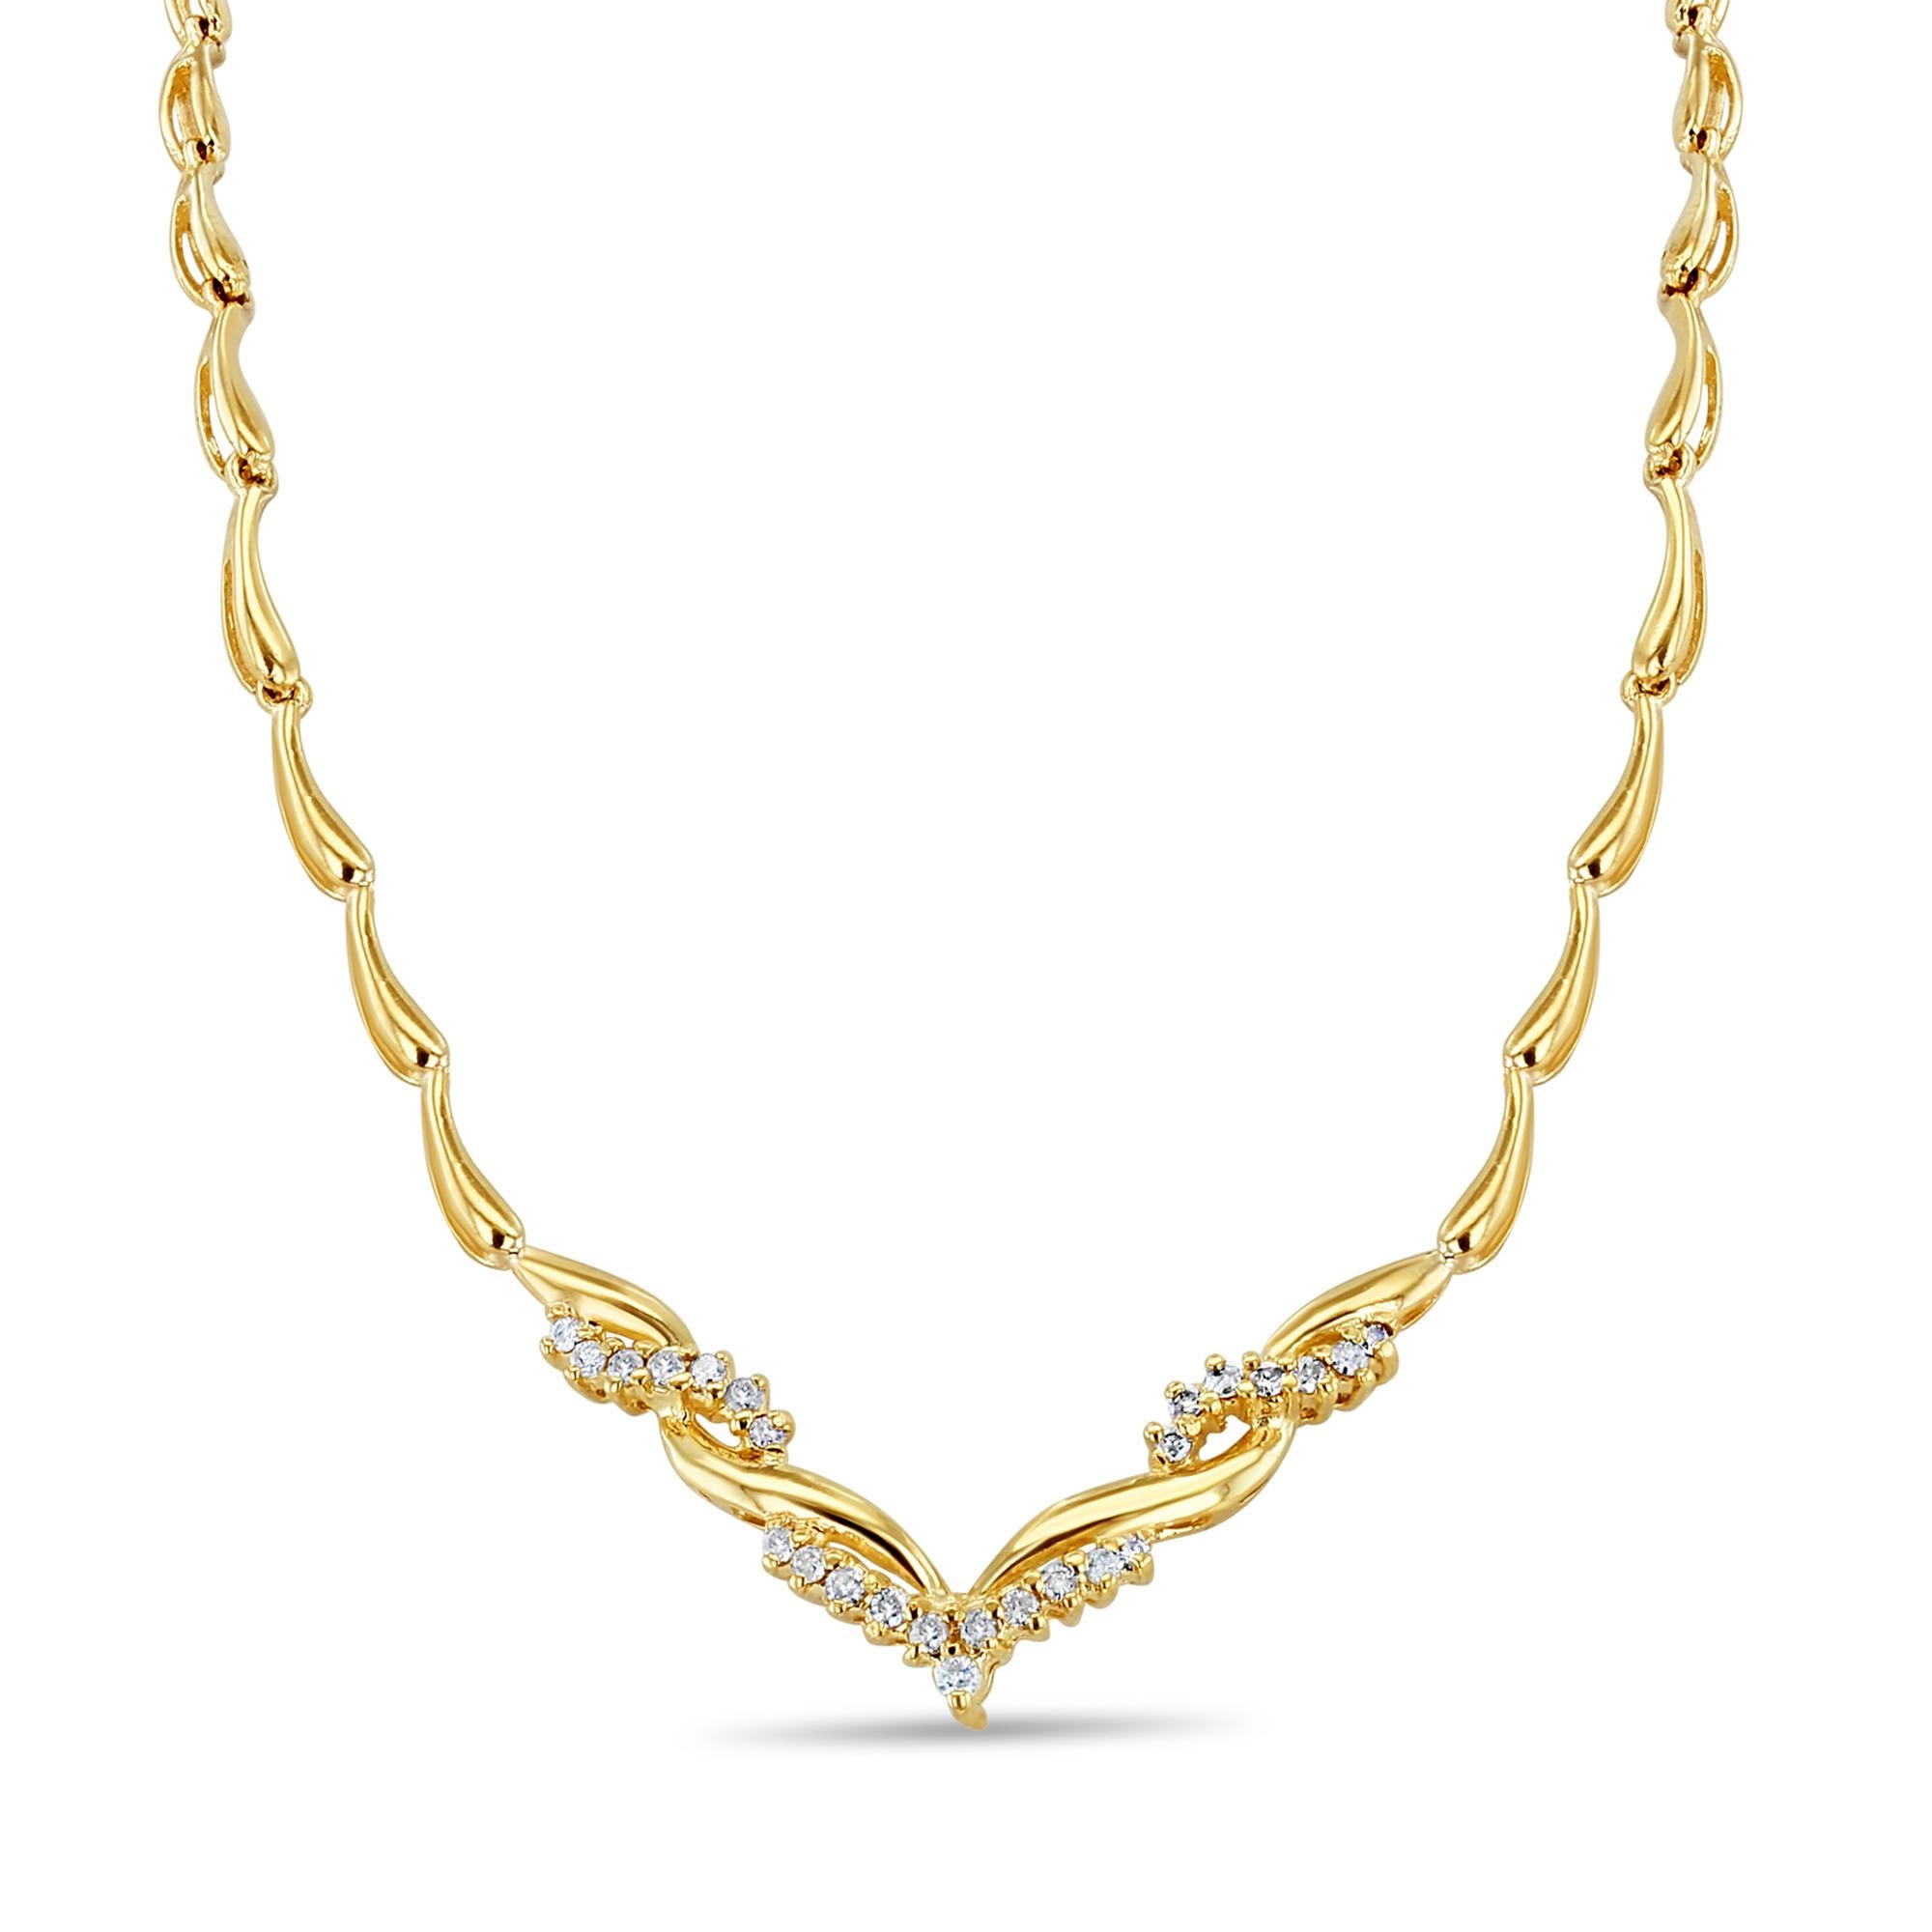 Half Carat 'V' Shaped Diamond Twisted Gold Necklace 14k Yellow Gold In New Condition For Sale In Sugar Land, TX